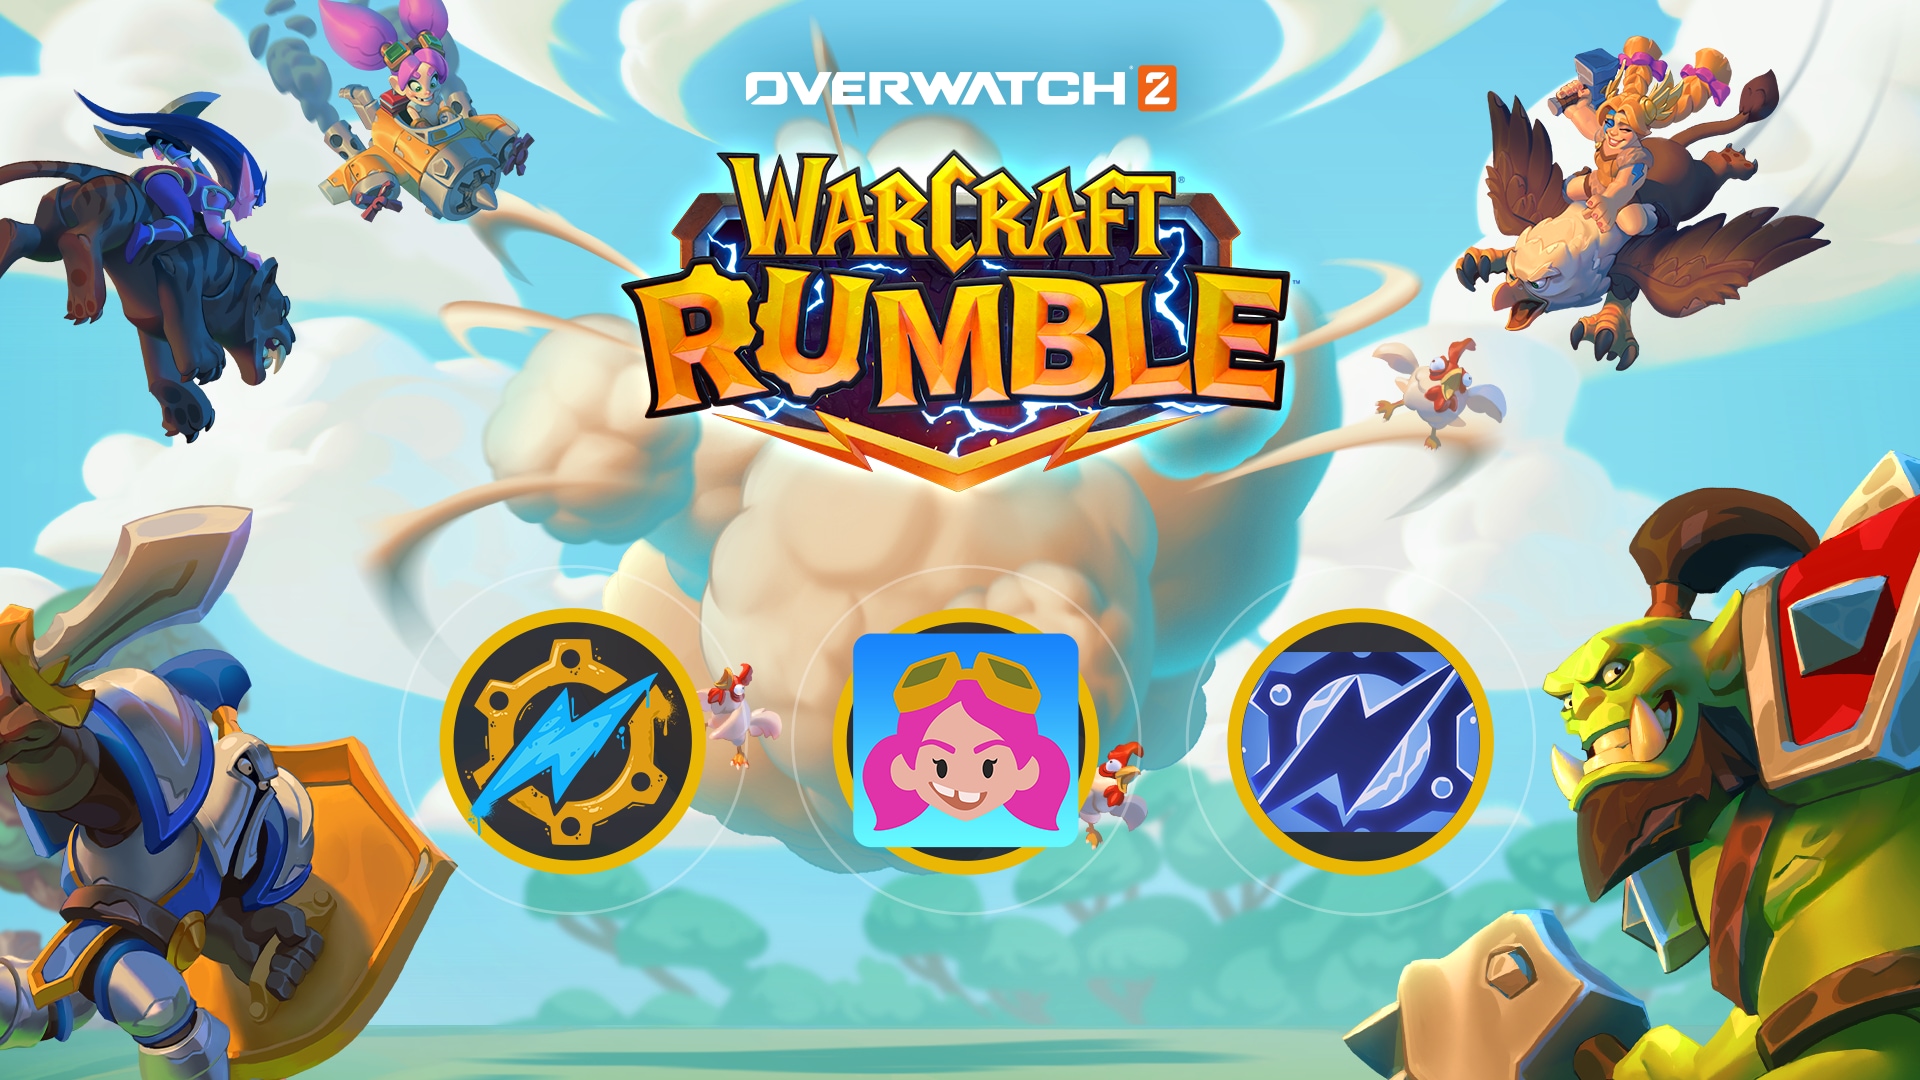 Warcraft Rumble Bundle on the Shop - General Discussion - Overwatch Forums